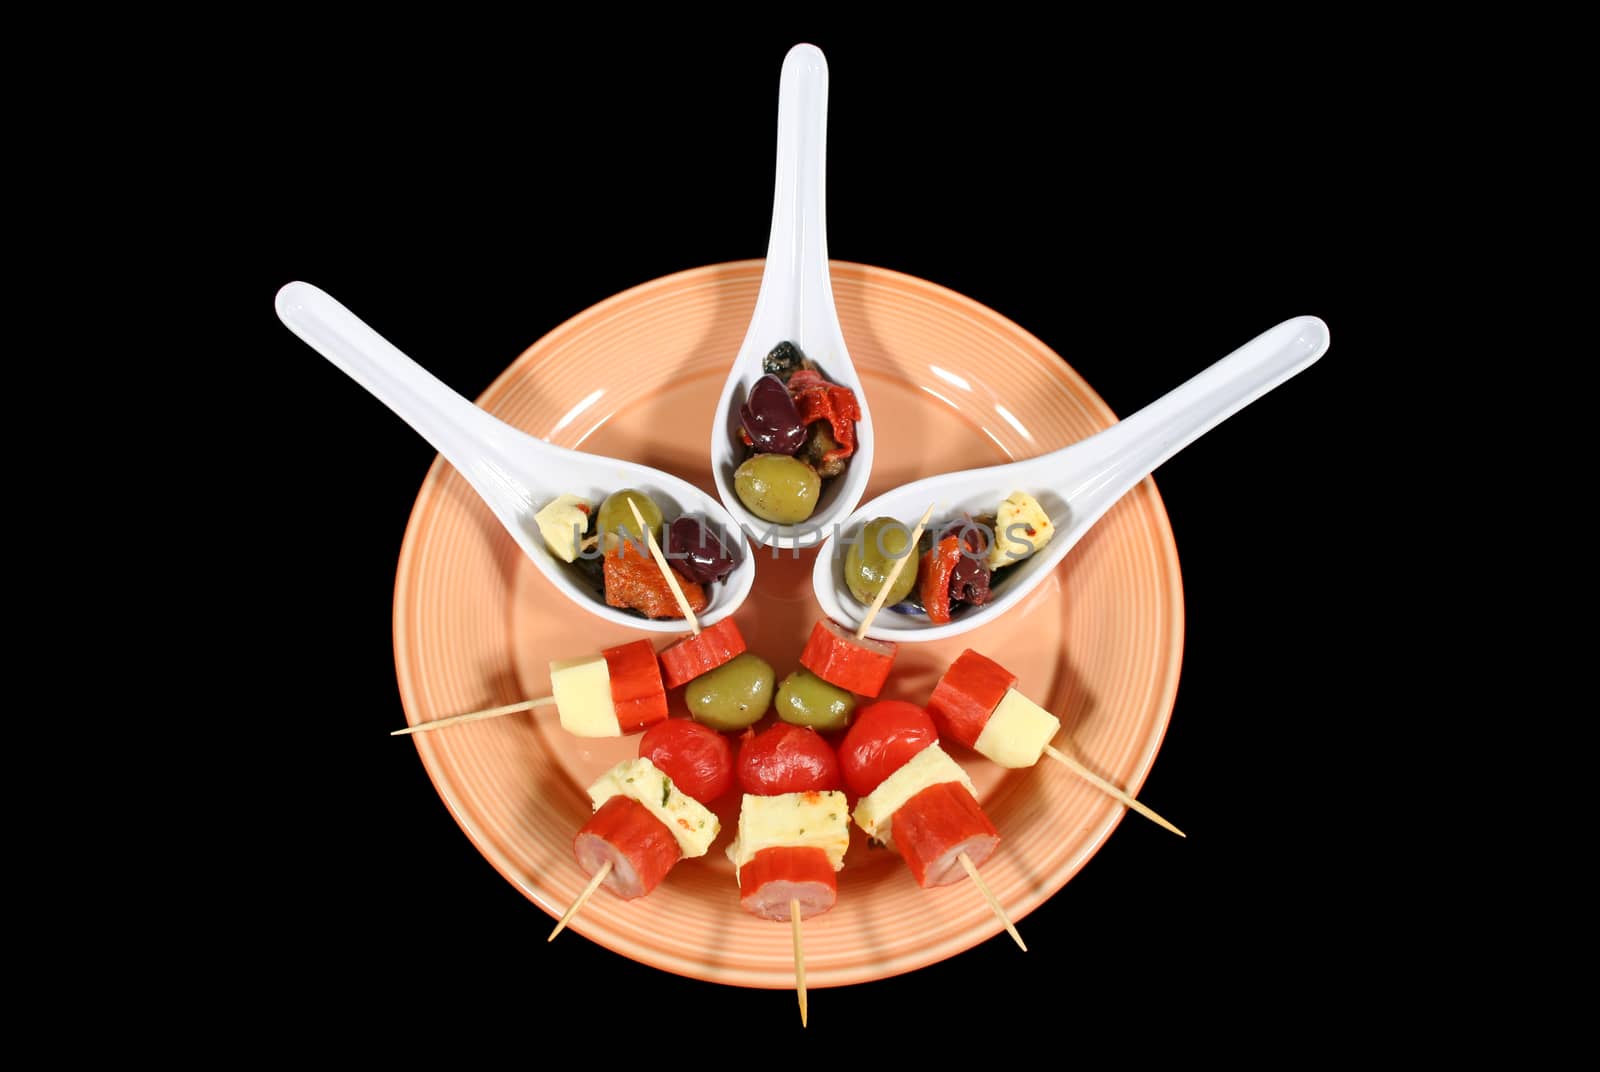 Delightful antipasto presented on spoons and toothpicks.